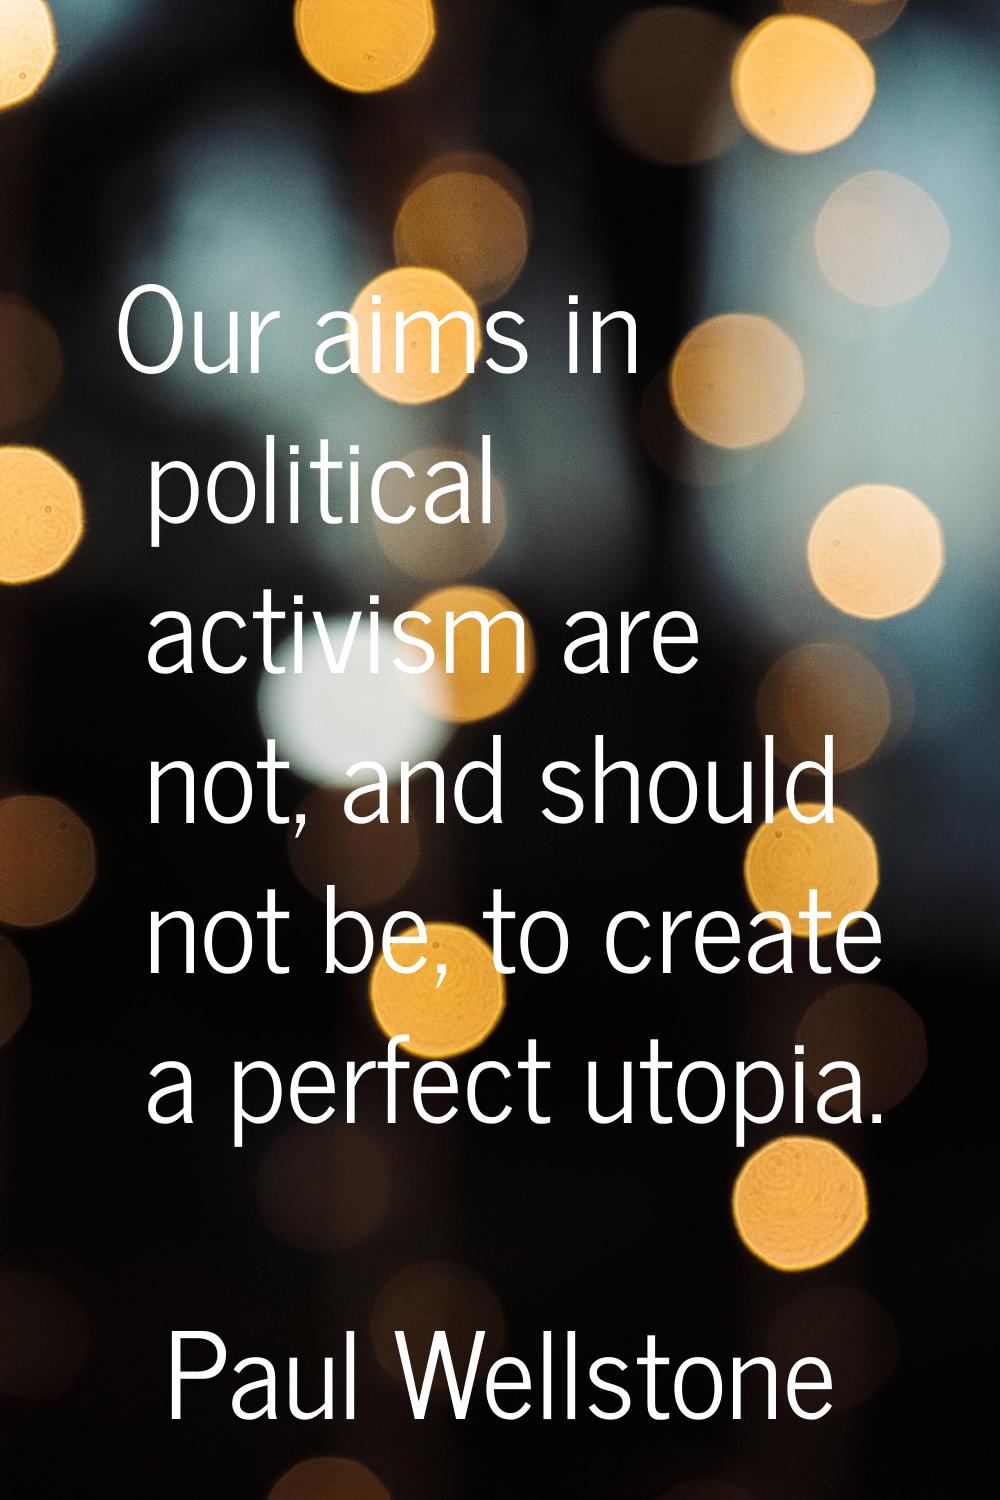 Our aims in political activism are not, and should not be, to create a perfect utopia.